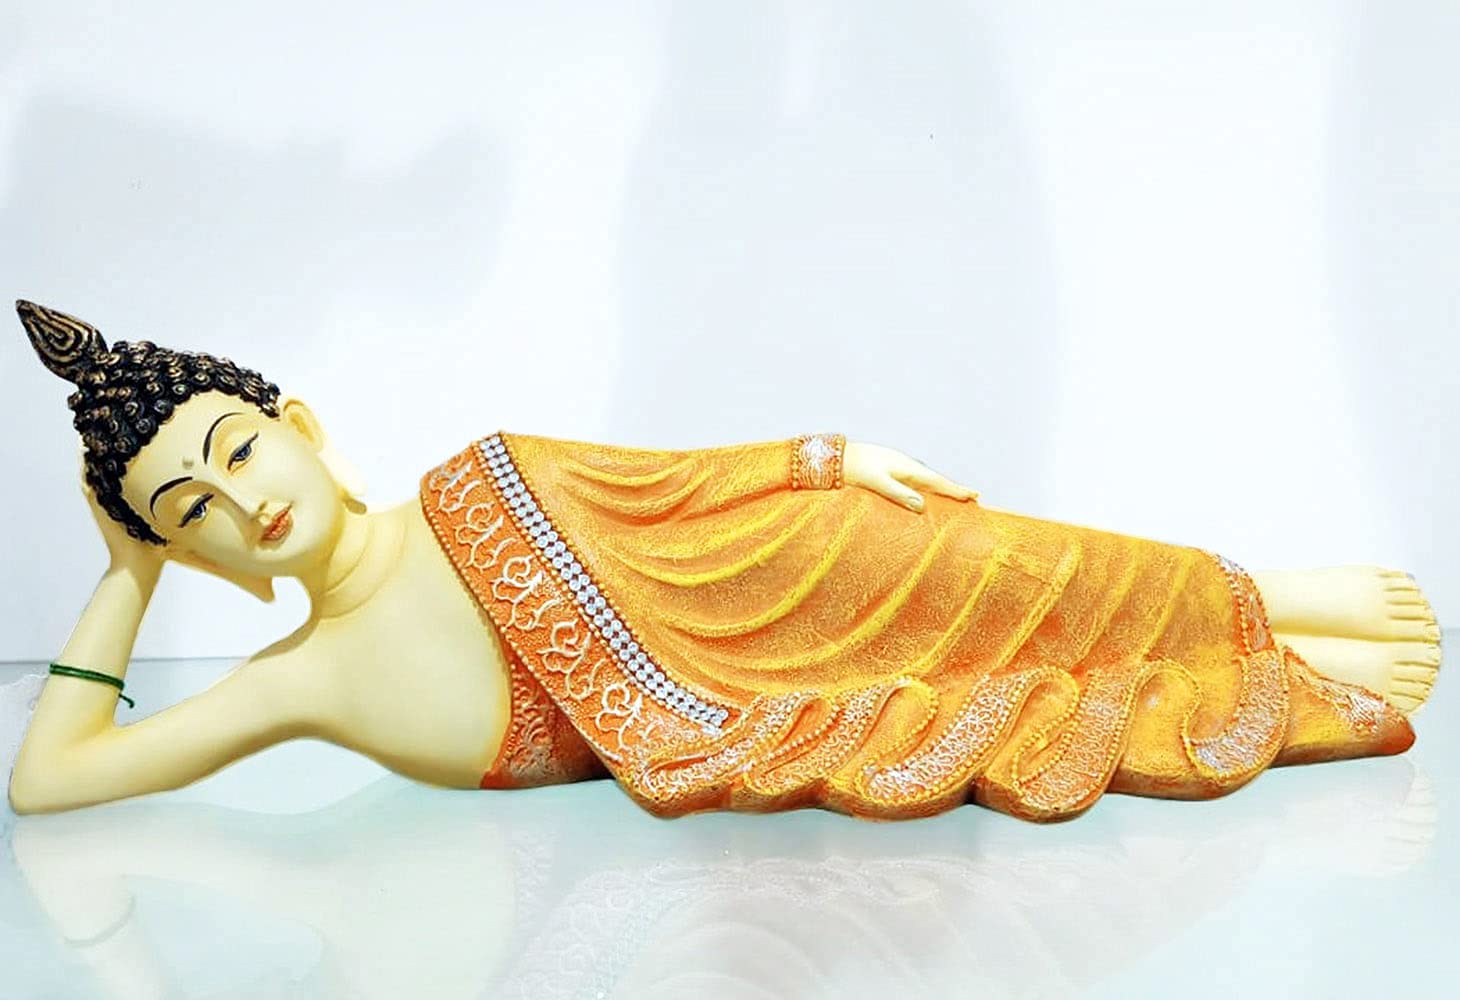 Meaning Of A Sleeping Buddha